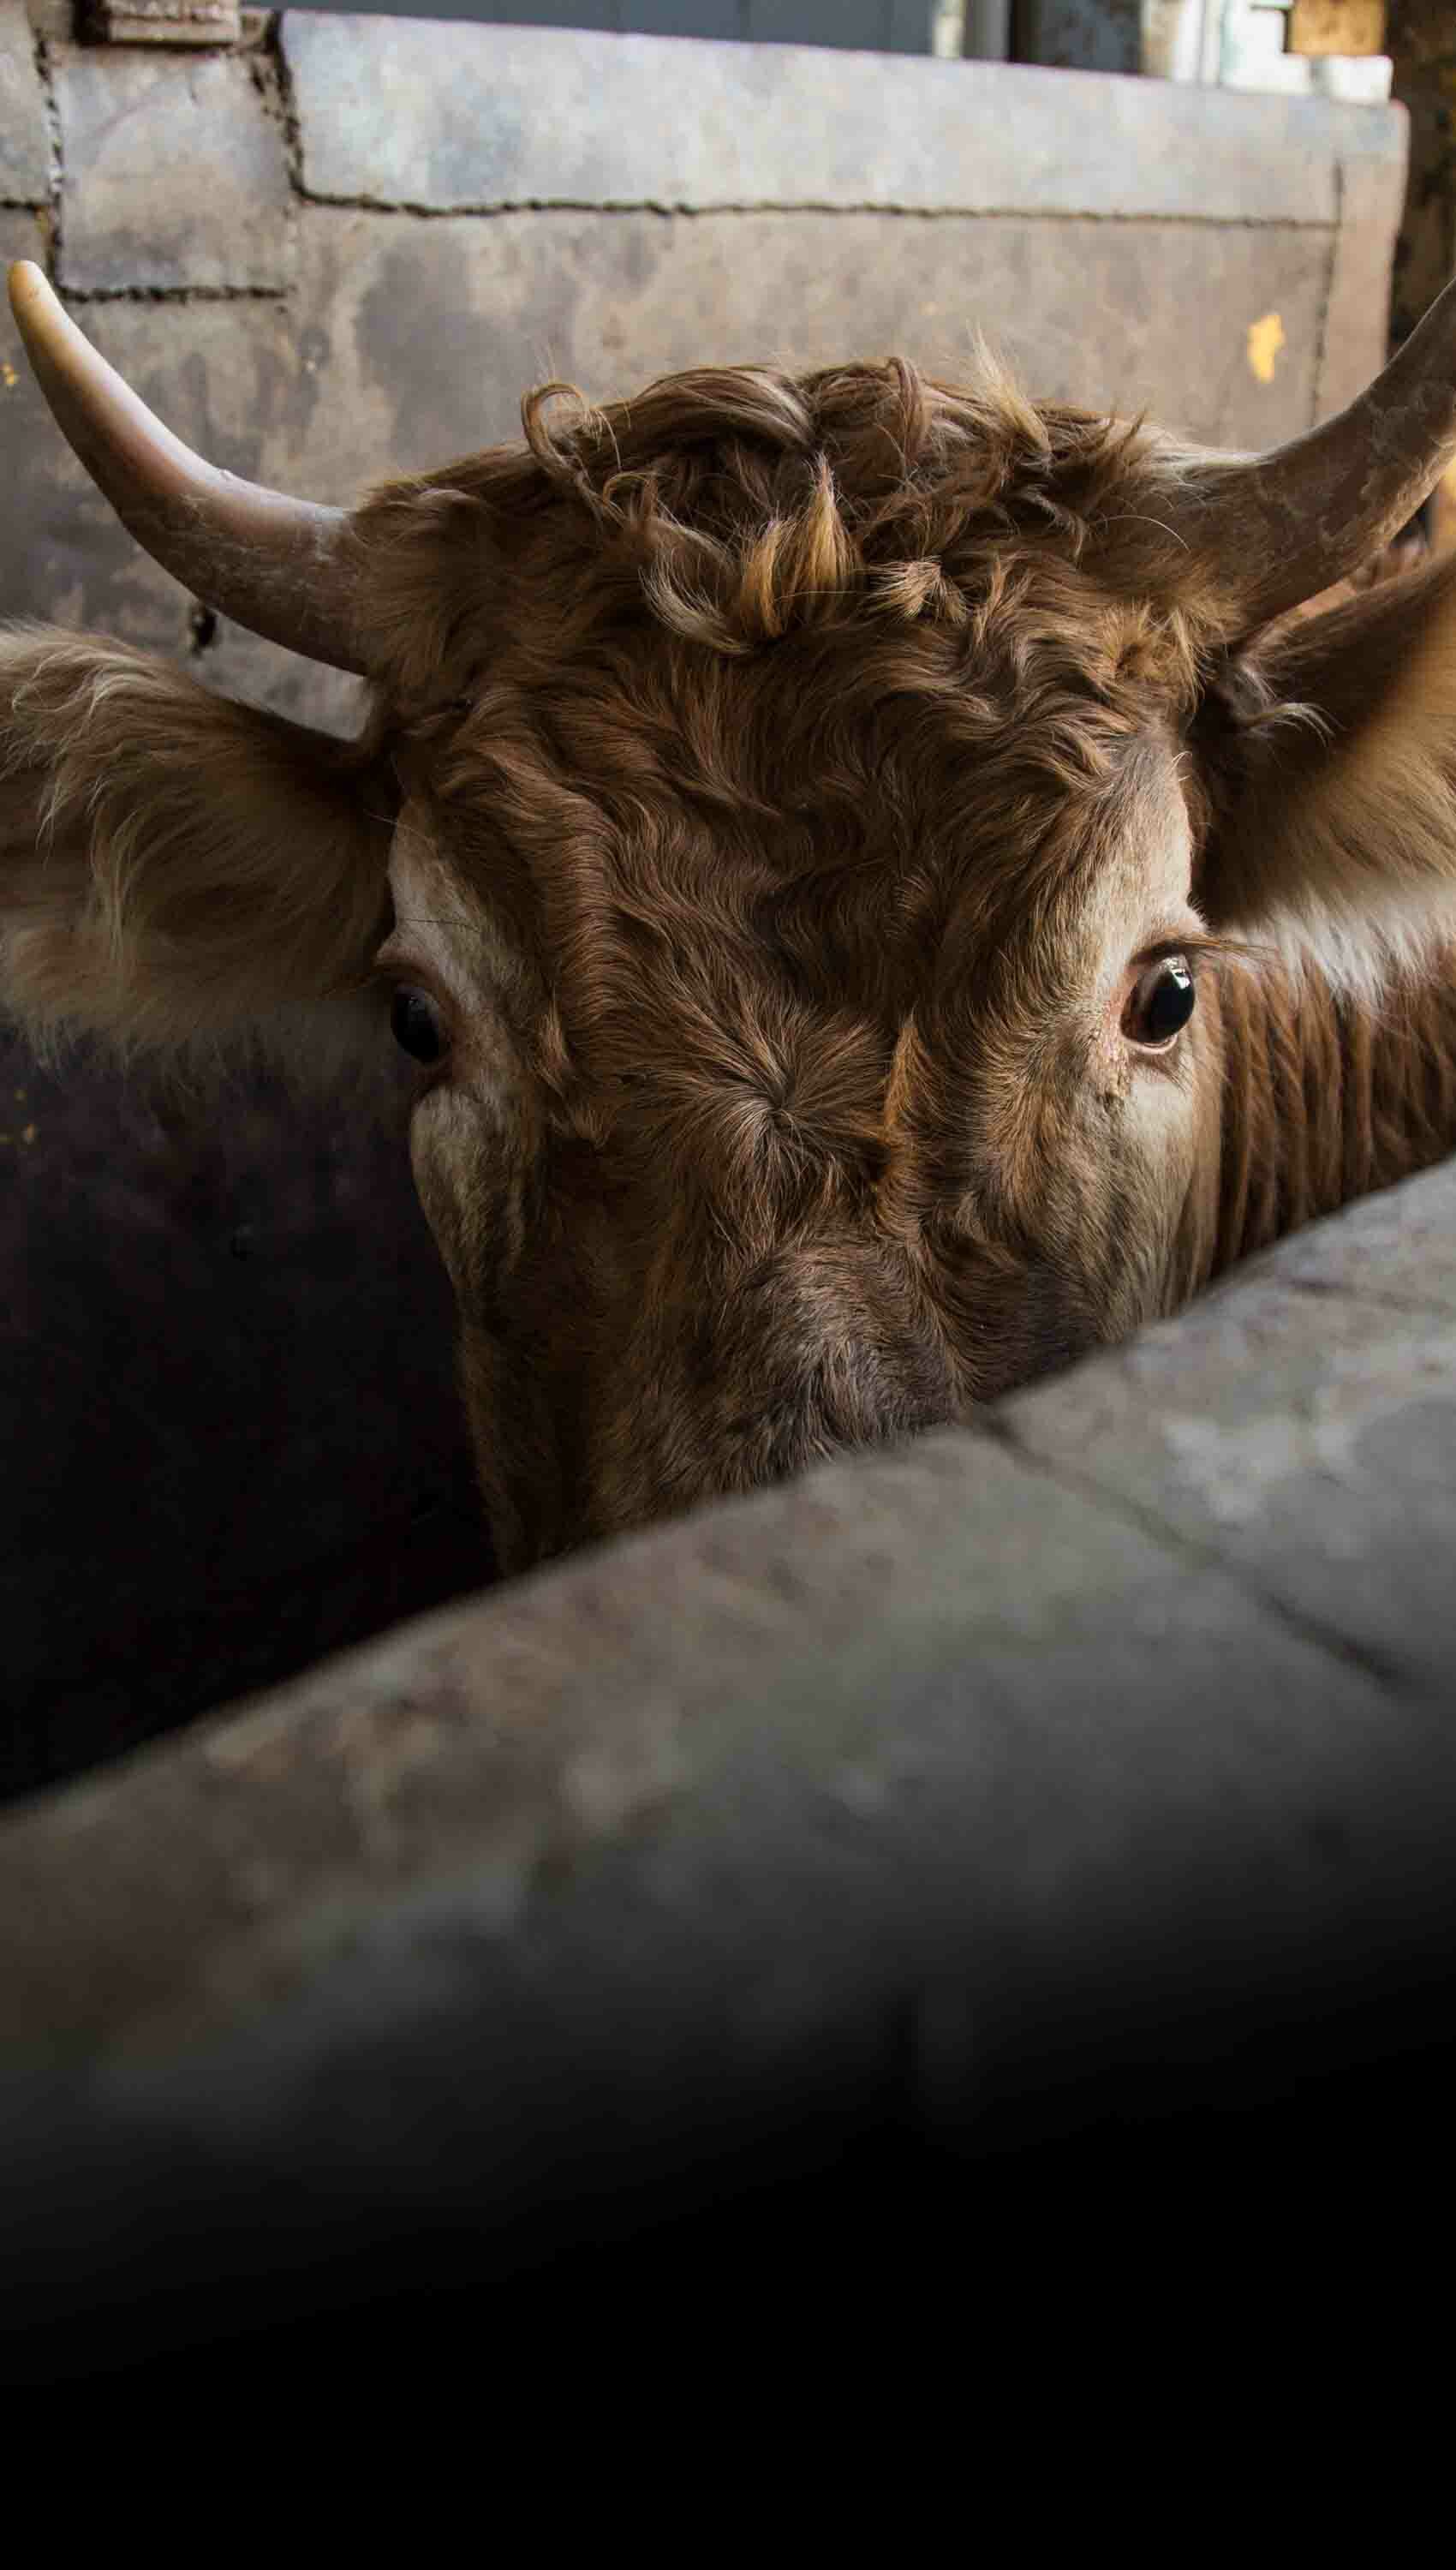 cow nervously waiting in a slaughterhouse